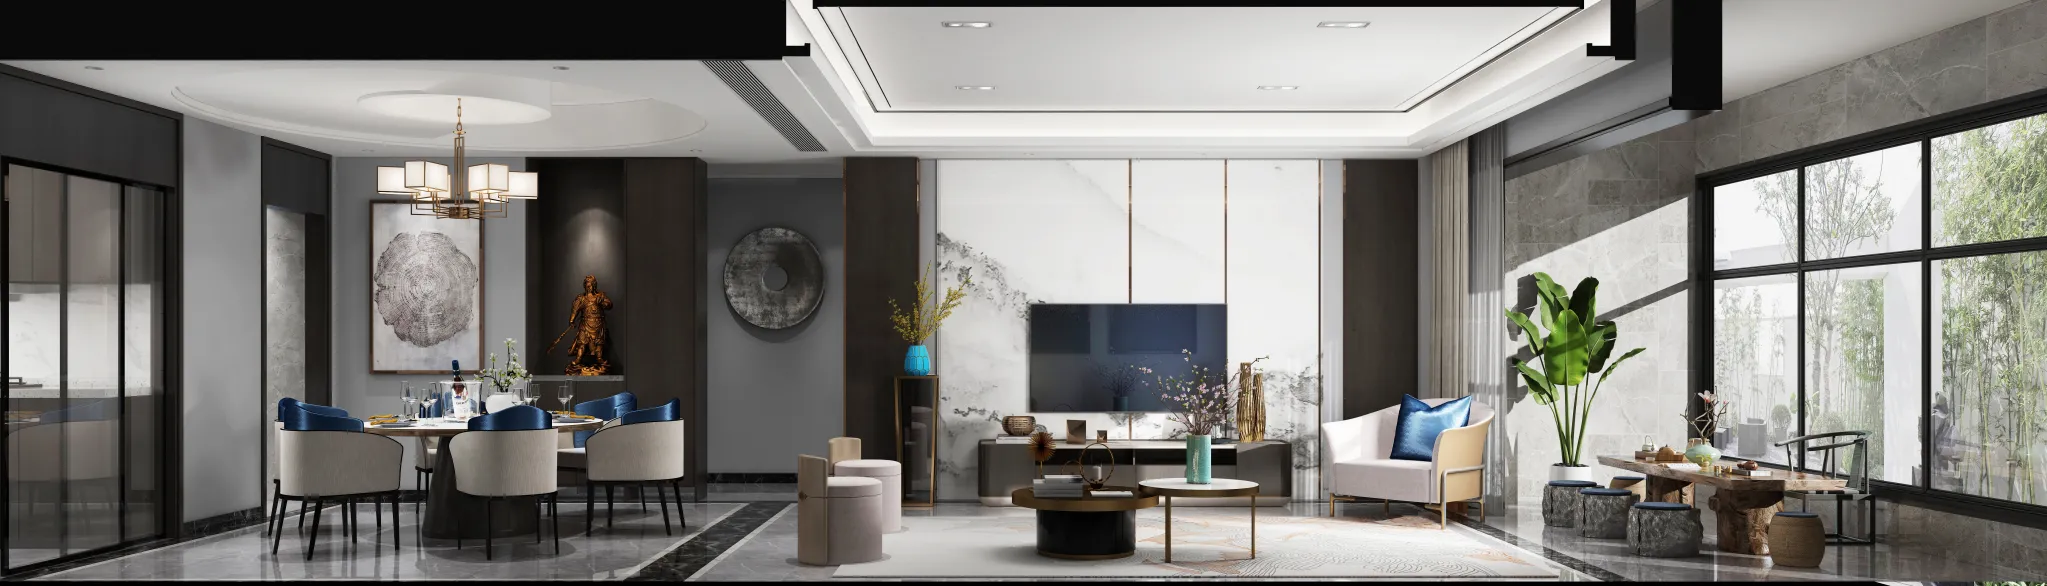 DESMOD INTERIOR 2021 (VRAY) – 4. LIVING ROOM – CHINESE – 070